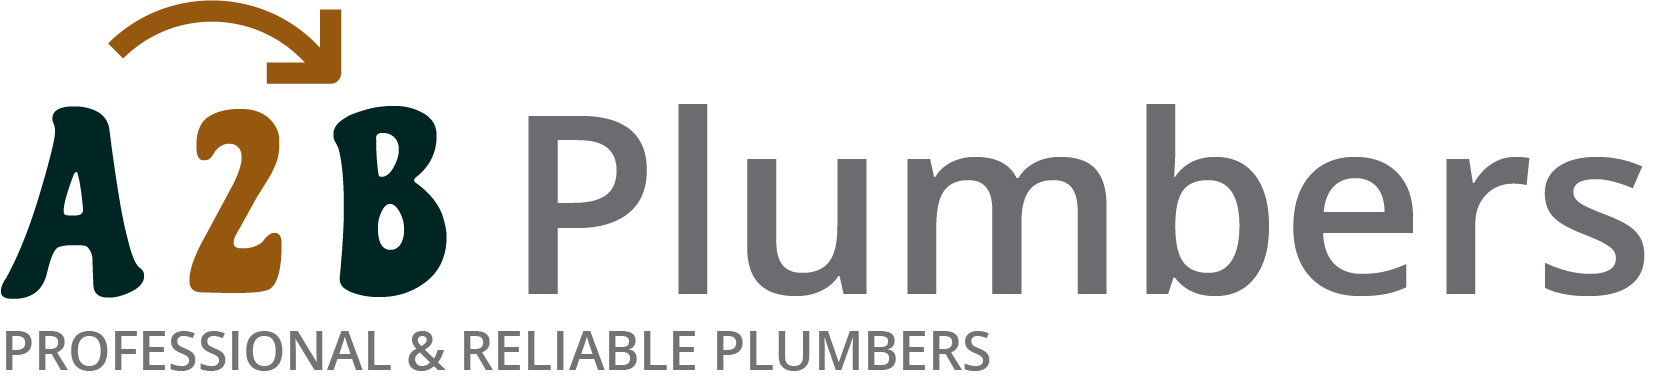 If you need a boiler installed, a radiator repaired or a leaking tap fixed, call us now - we provide services for properties in Urmston and the local area.